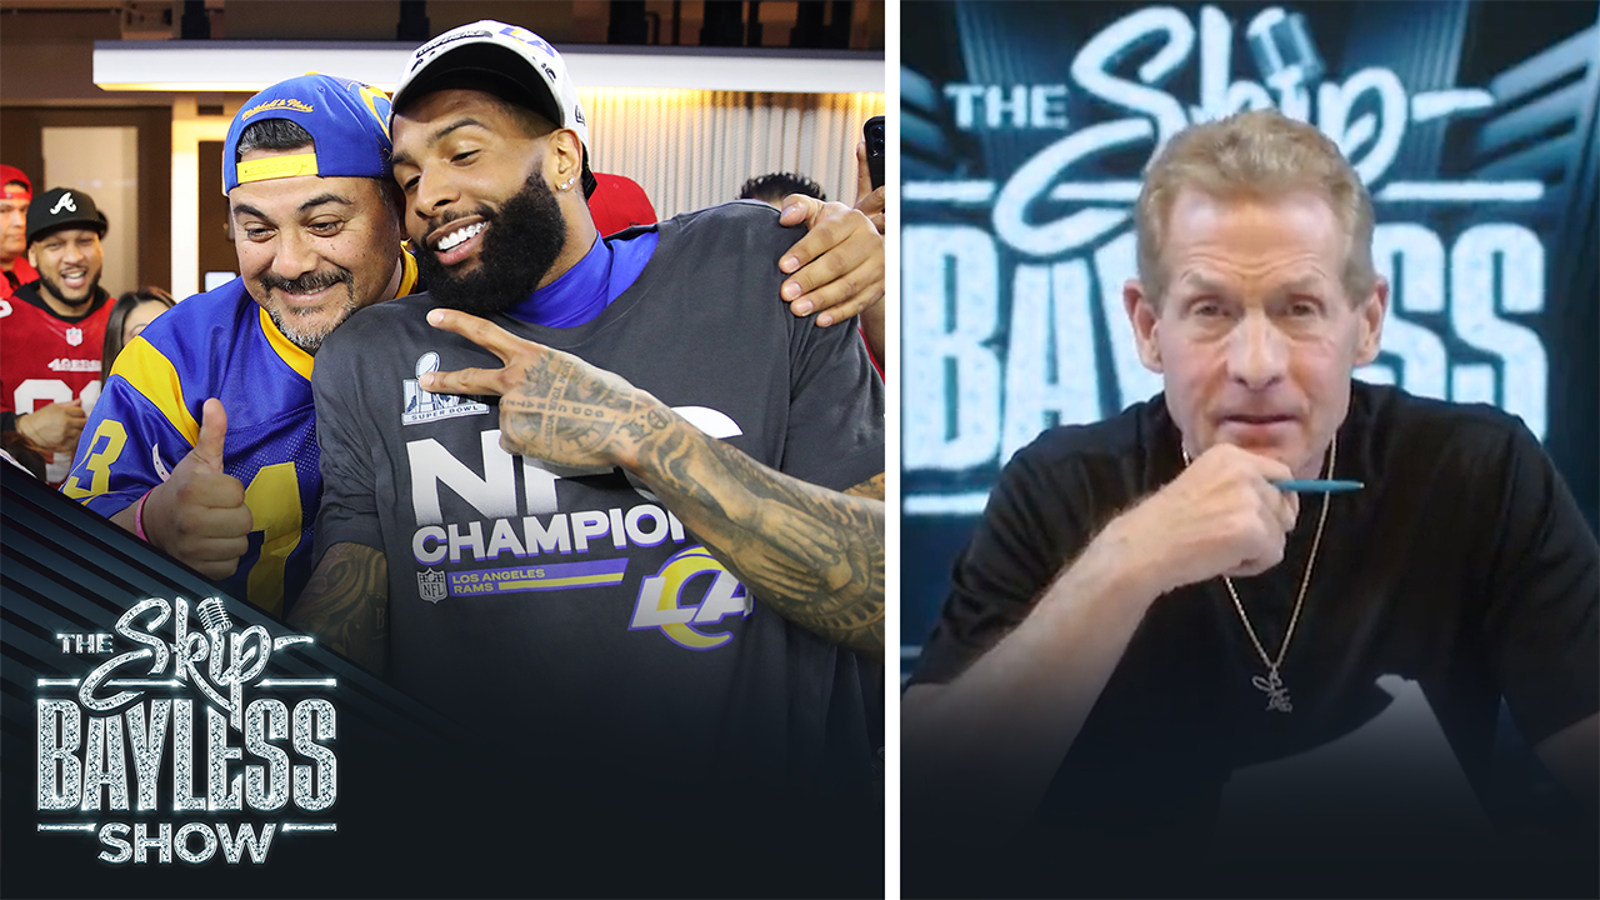 Skip Bayless: L.A. sports fans are the worst in America